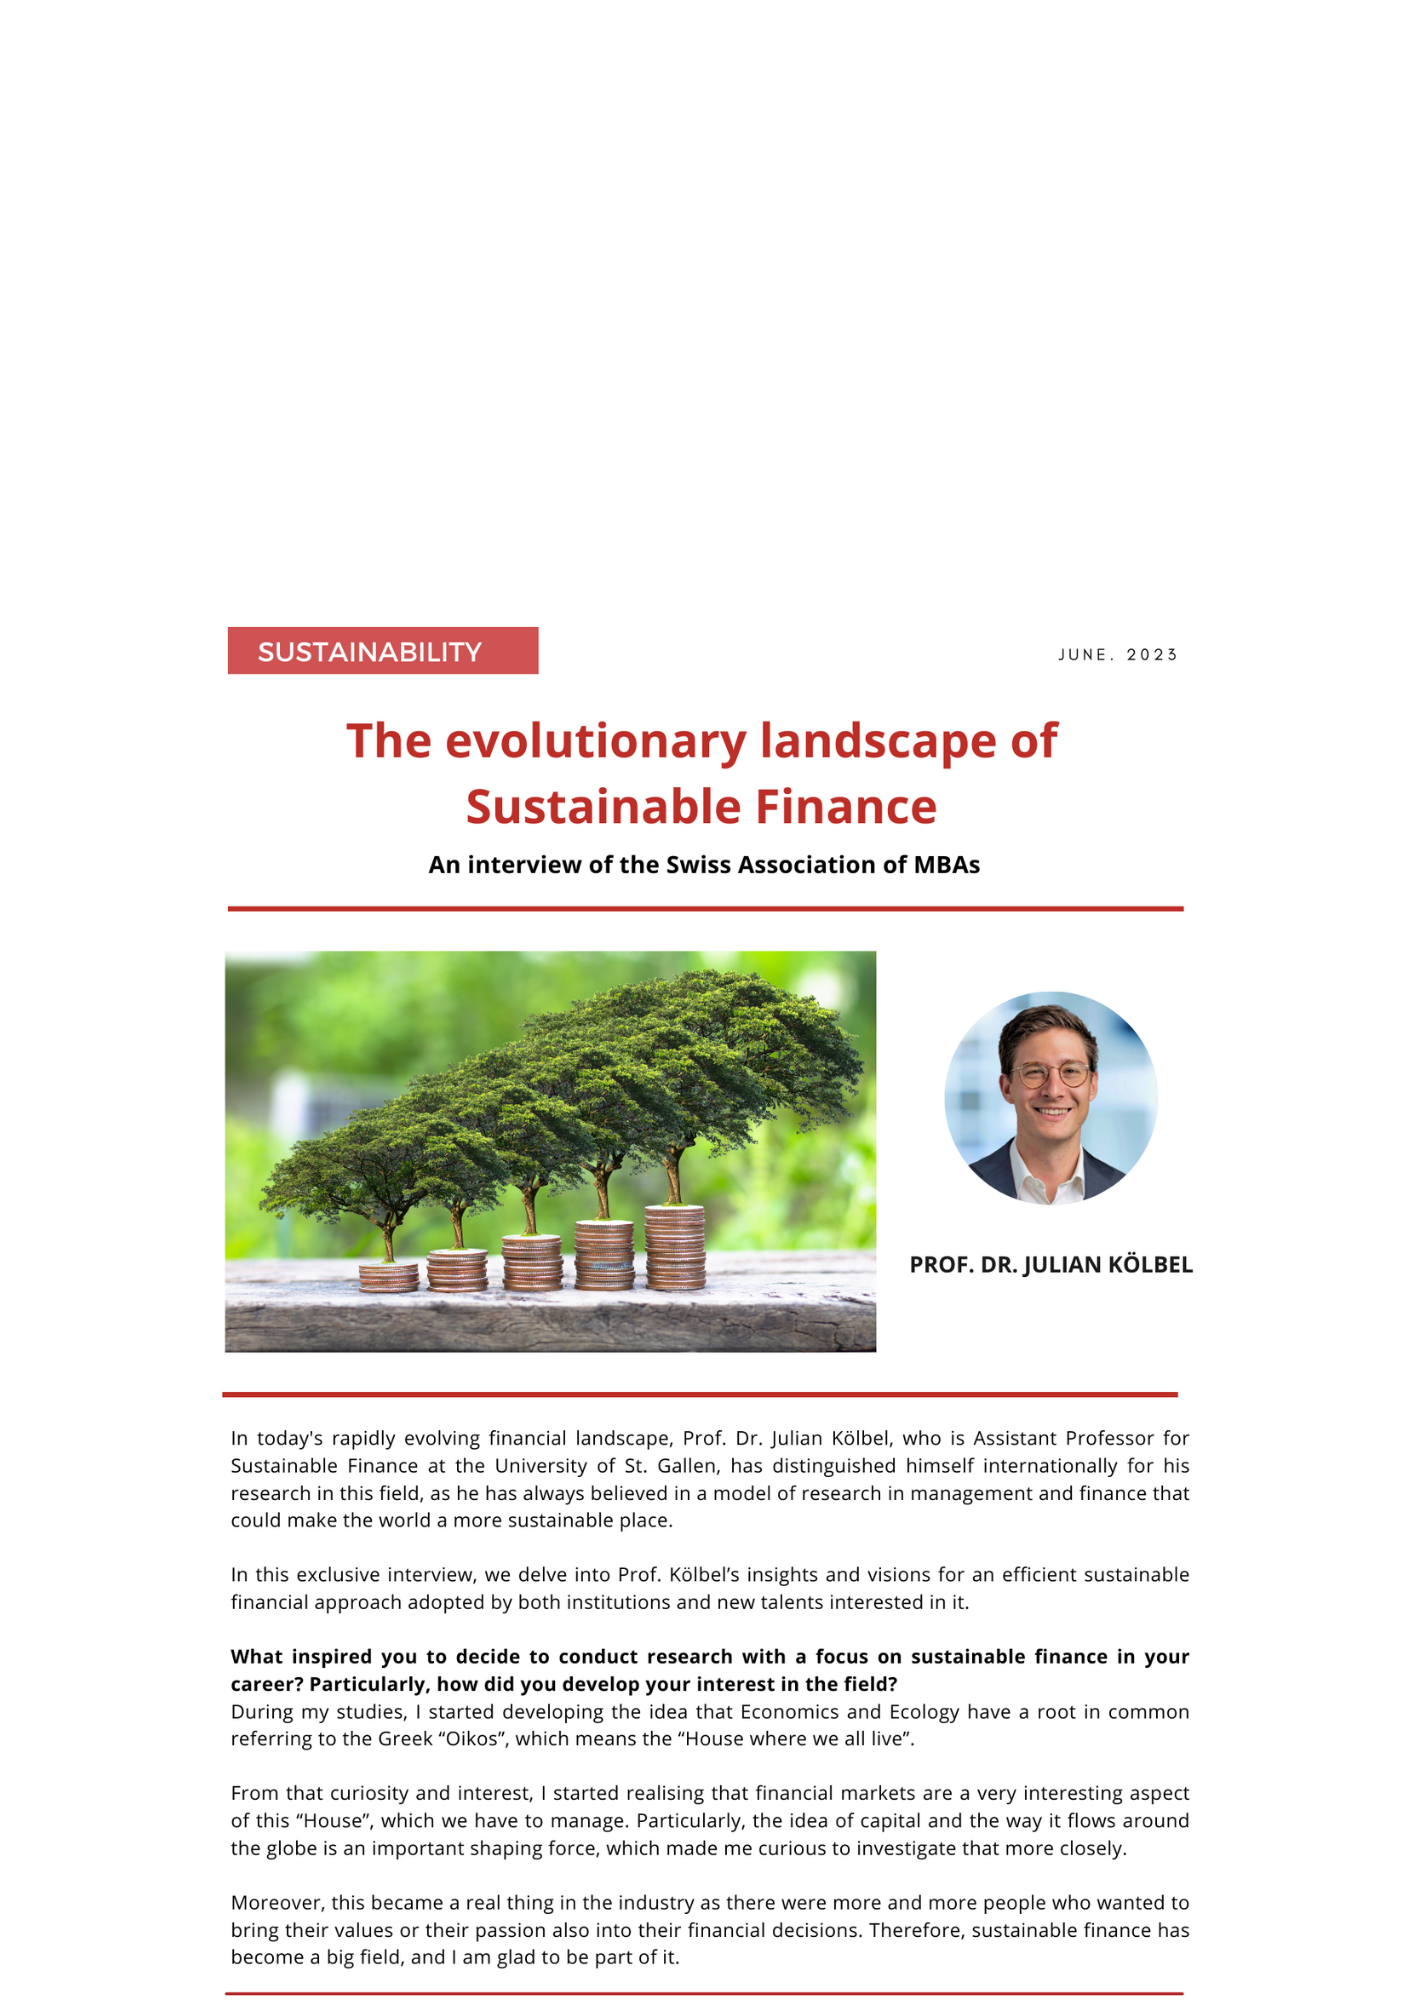 The evolutionary landscape of Sustainable Finance